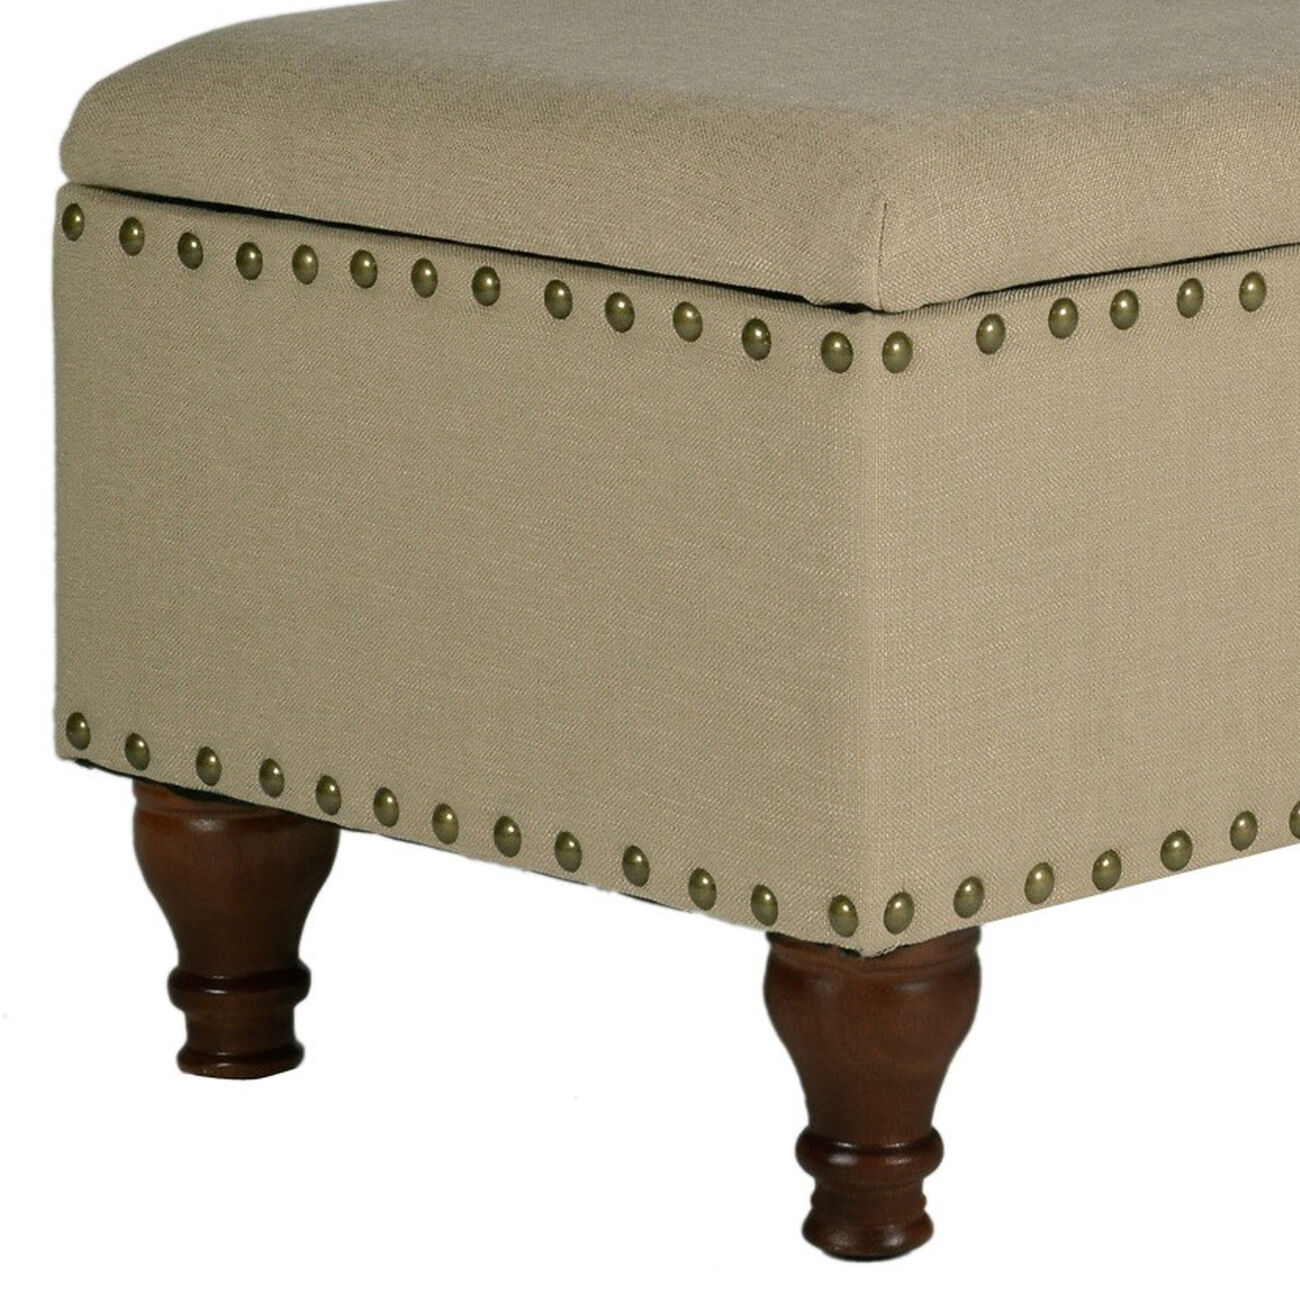 Fabric Upholstered Wooden Storage Bench With Nail head Trim, Large, Beige and Brown